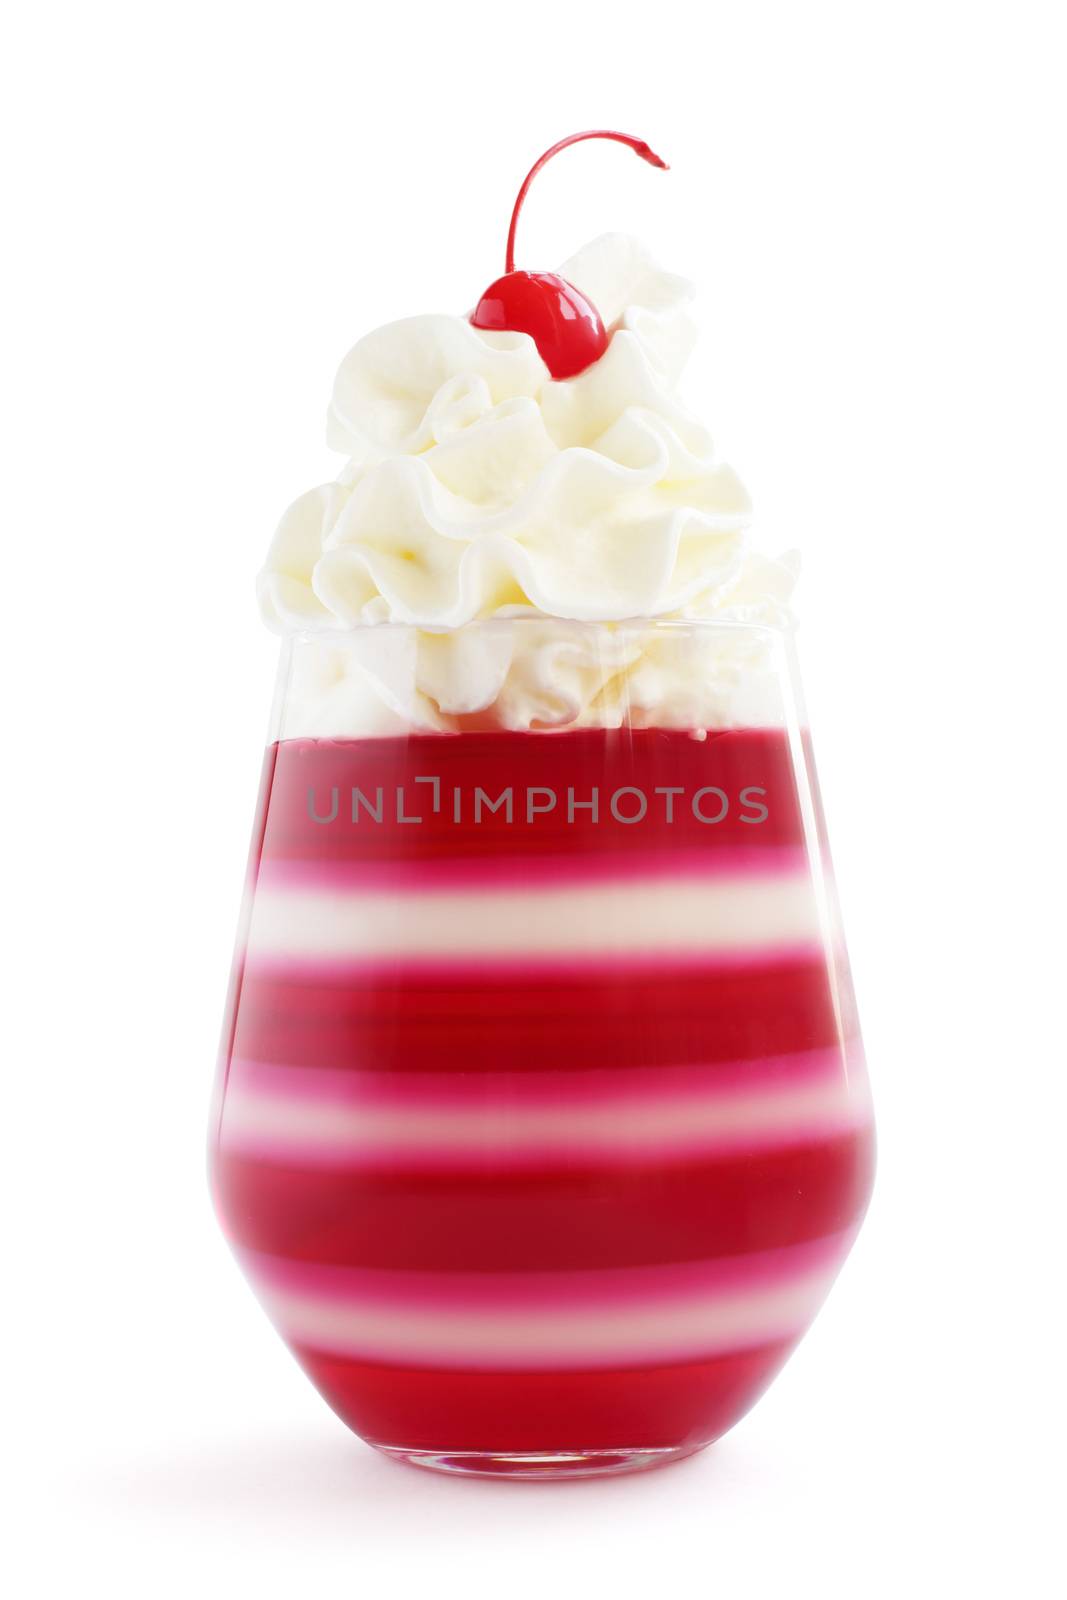 Red striped jello dessert in glass with whipped cream and red candied cherry on top isolated on white background